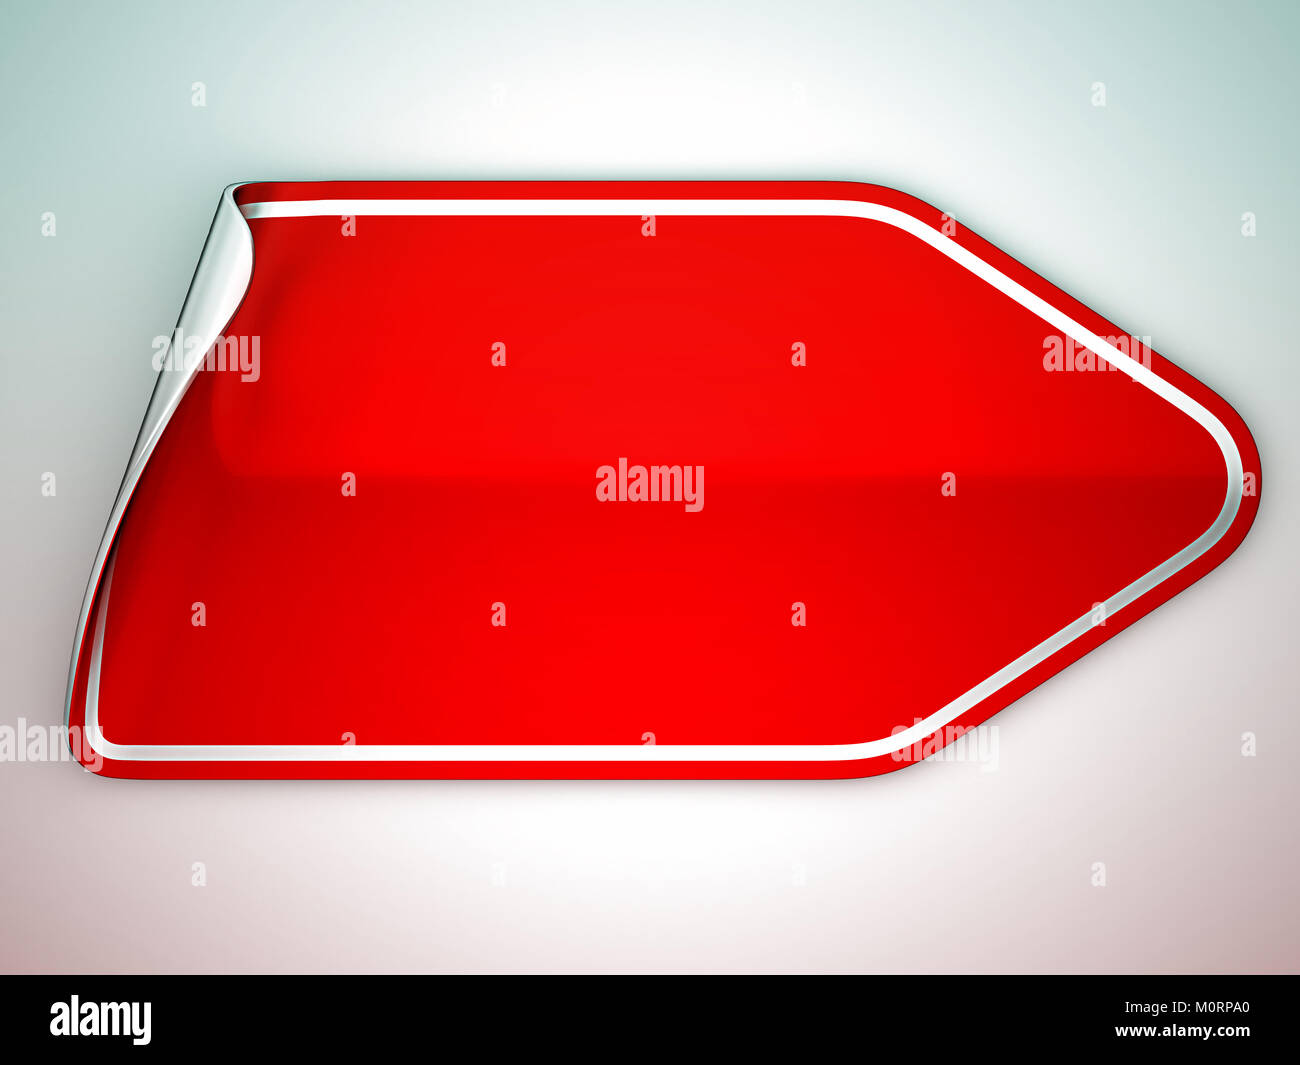 Red unstick bent sticker or label over grey spot light background Stock Photo